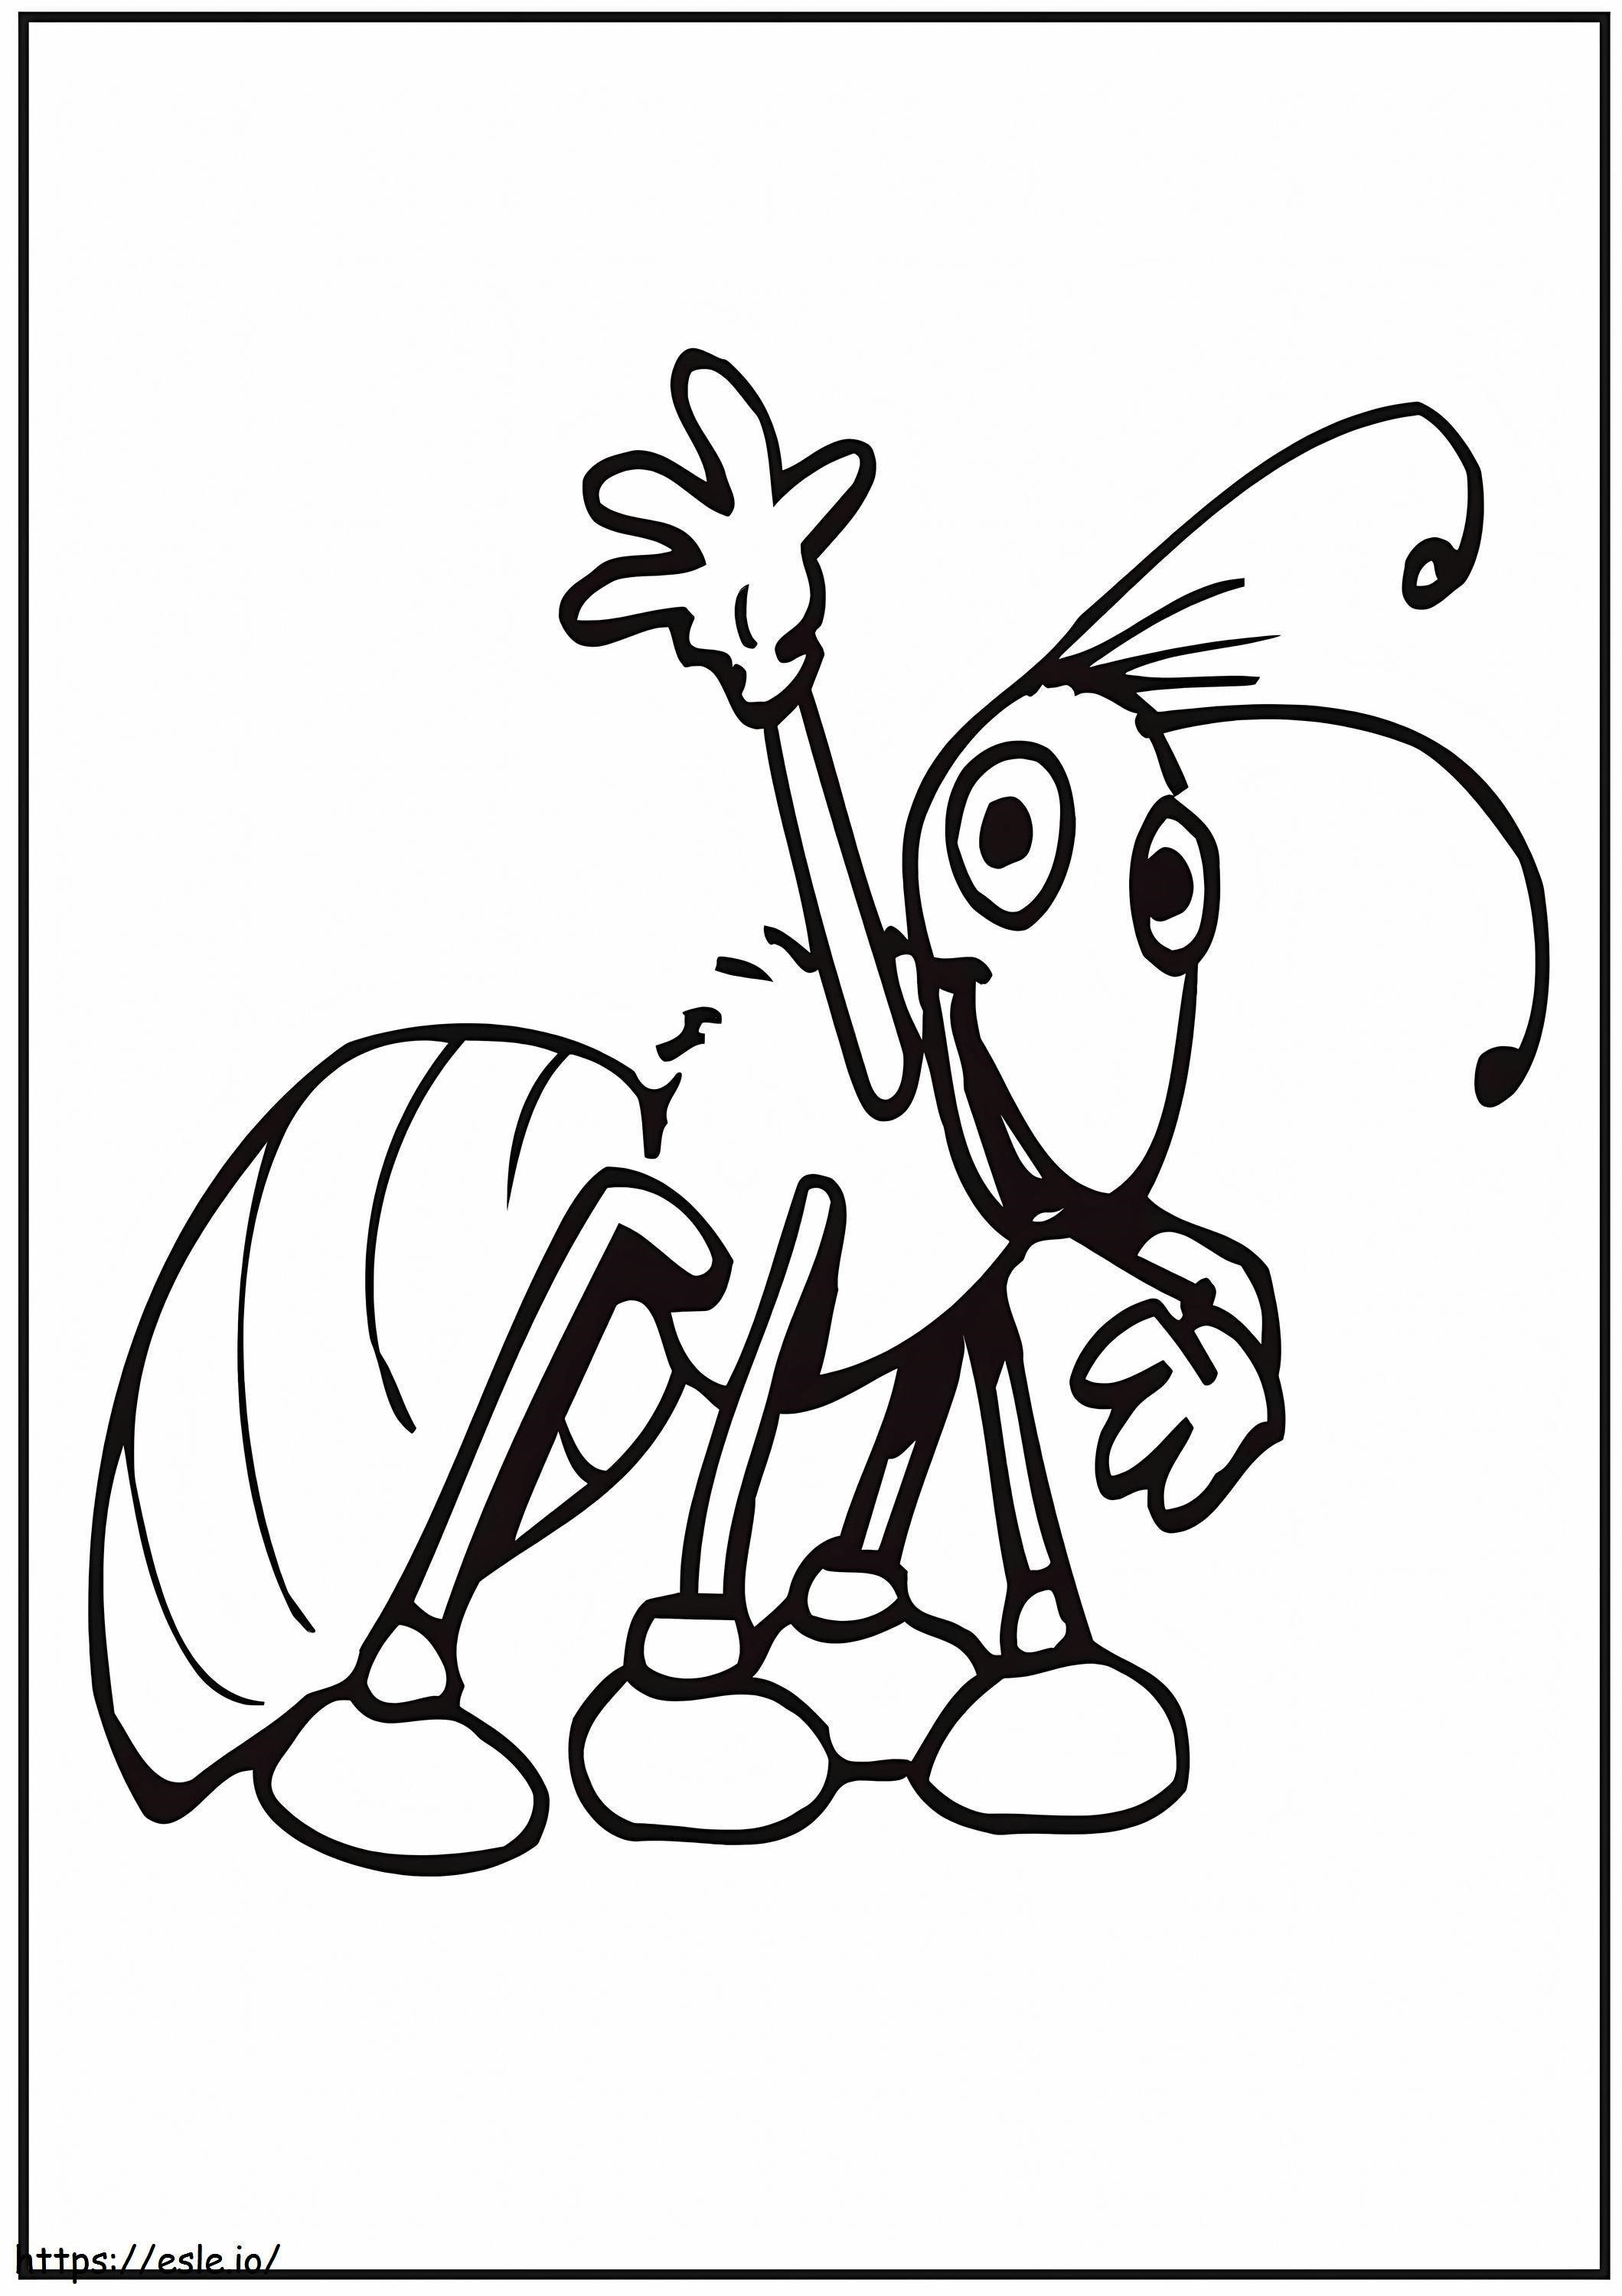 Ant Greets coloring page